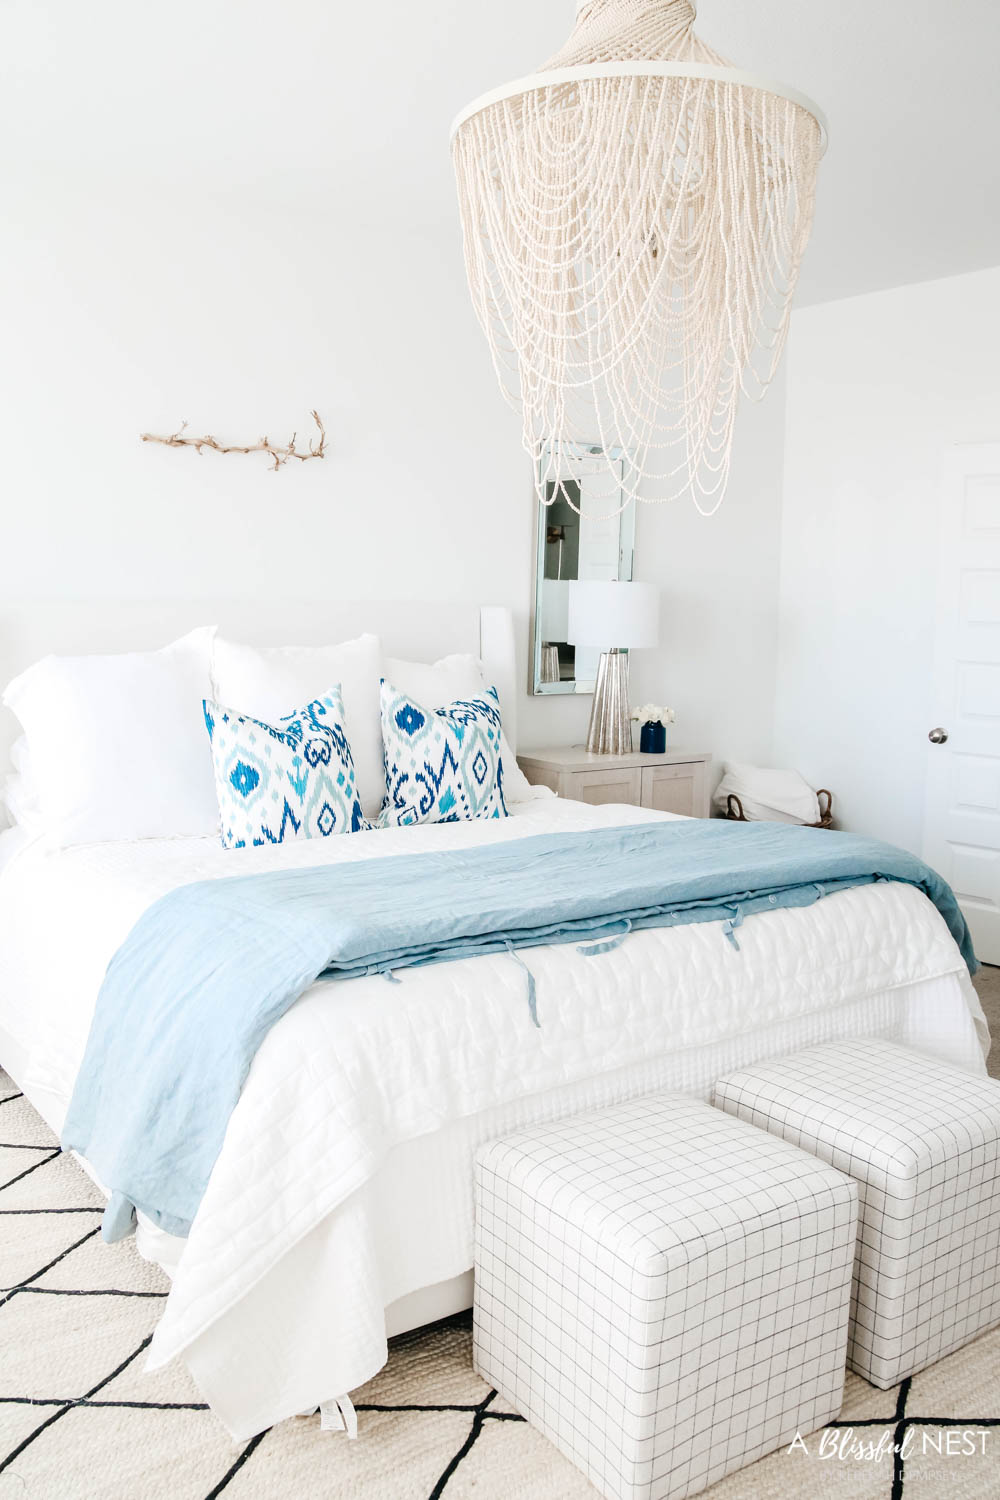 Master bedroom with blue and white details in bedding and furniture.